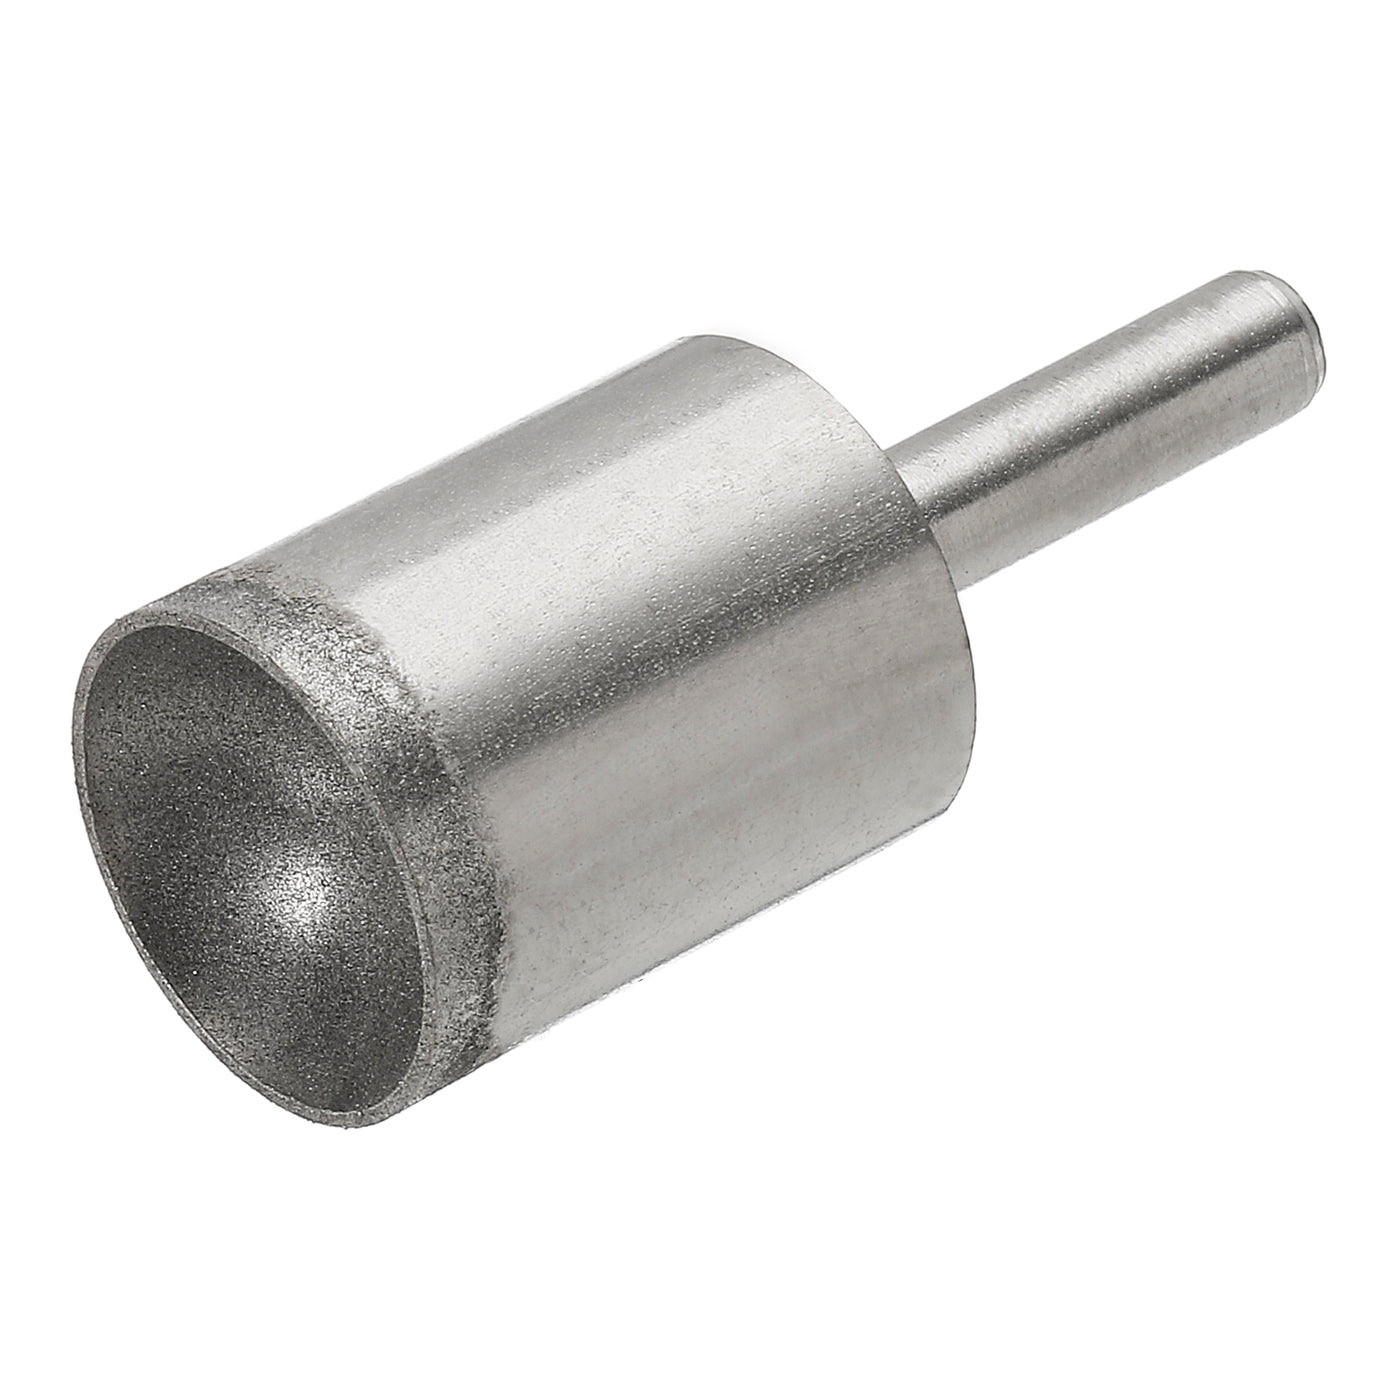 uxcell Uxcell 20mm 600 Grits Diamond Mounted Point Spherical Concave Head Bead Grinding Bit